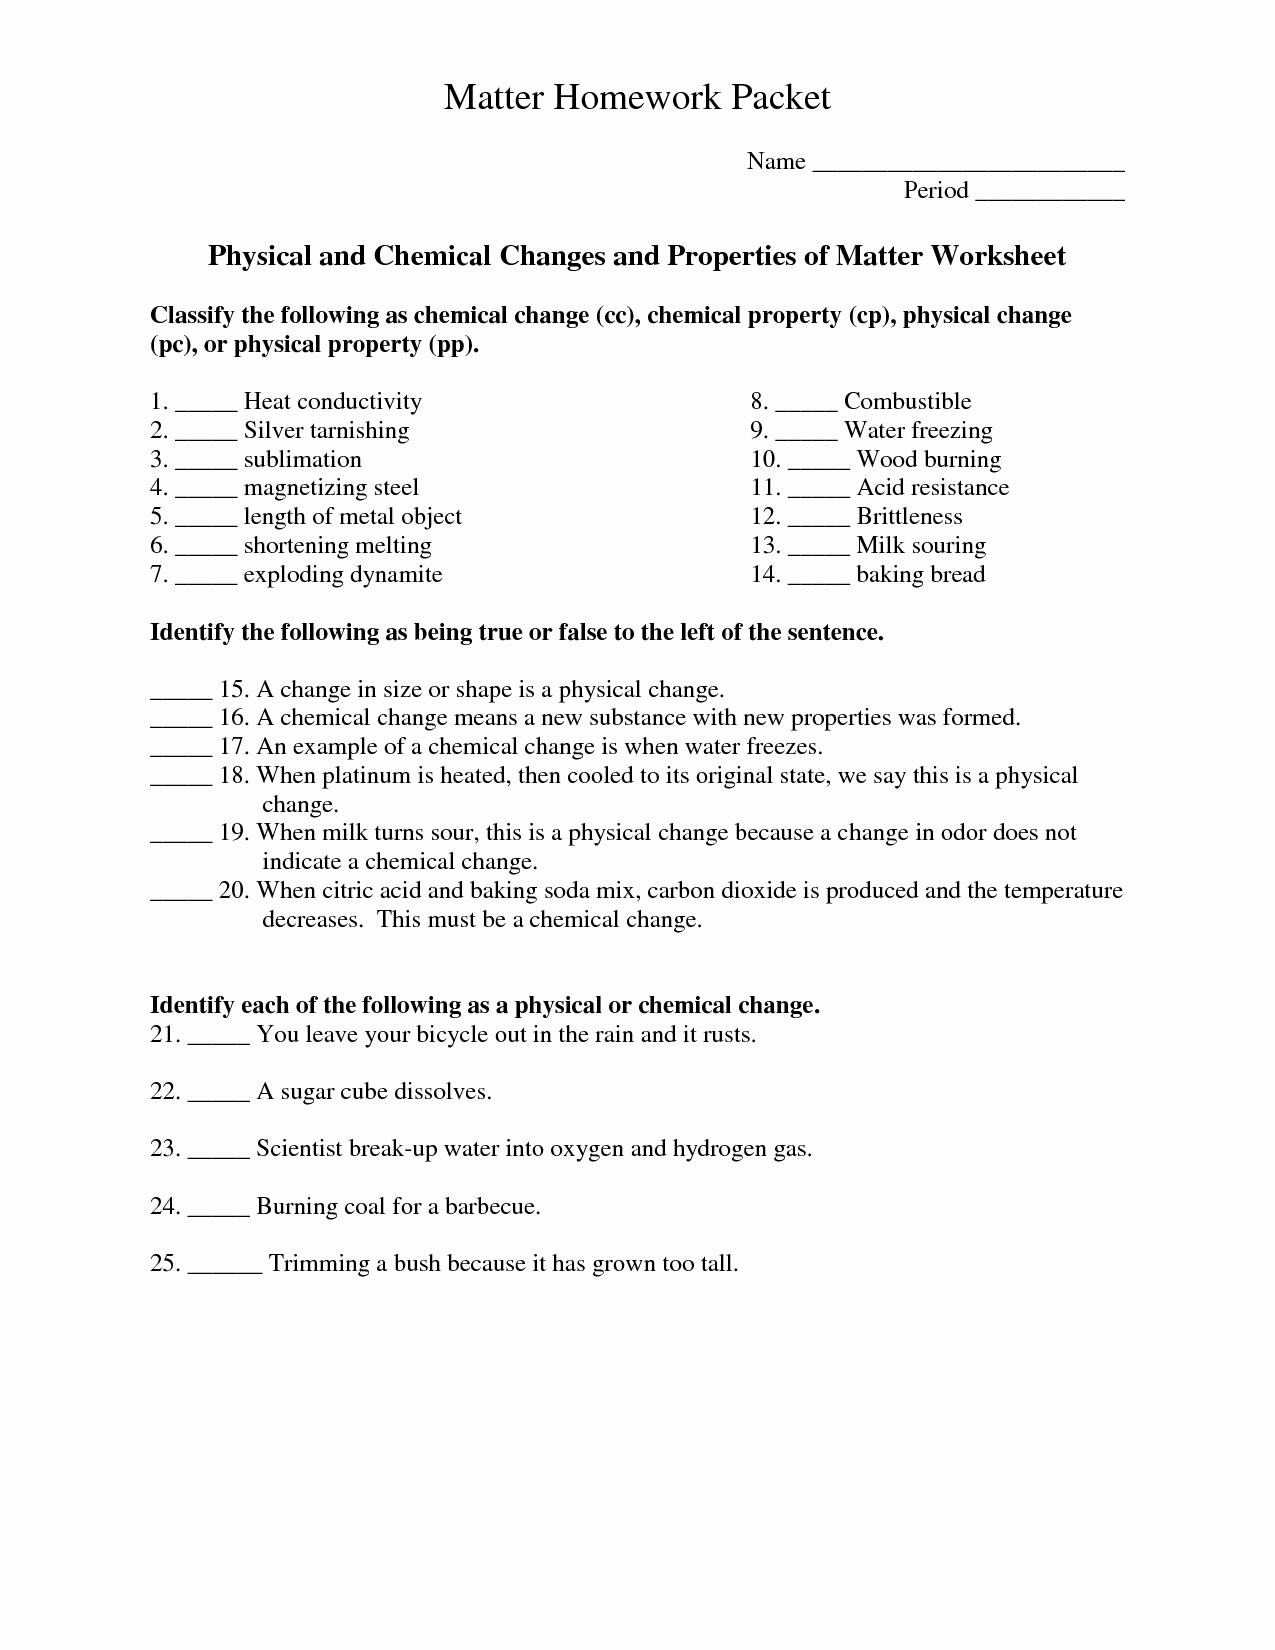 Composition Of Matter Worksheet Answers Beautiful Section 1 Position Matter Worksheet Answers